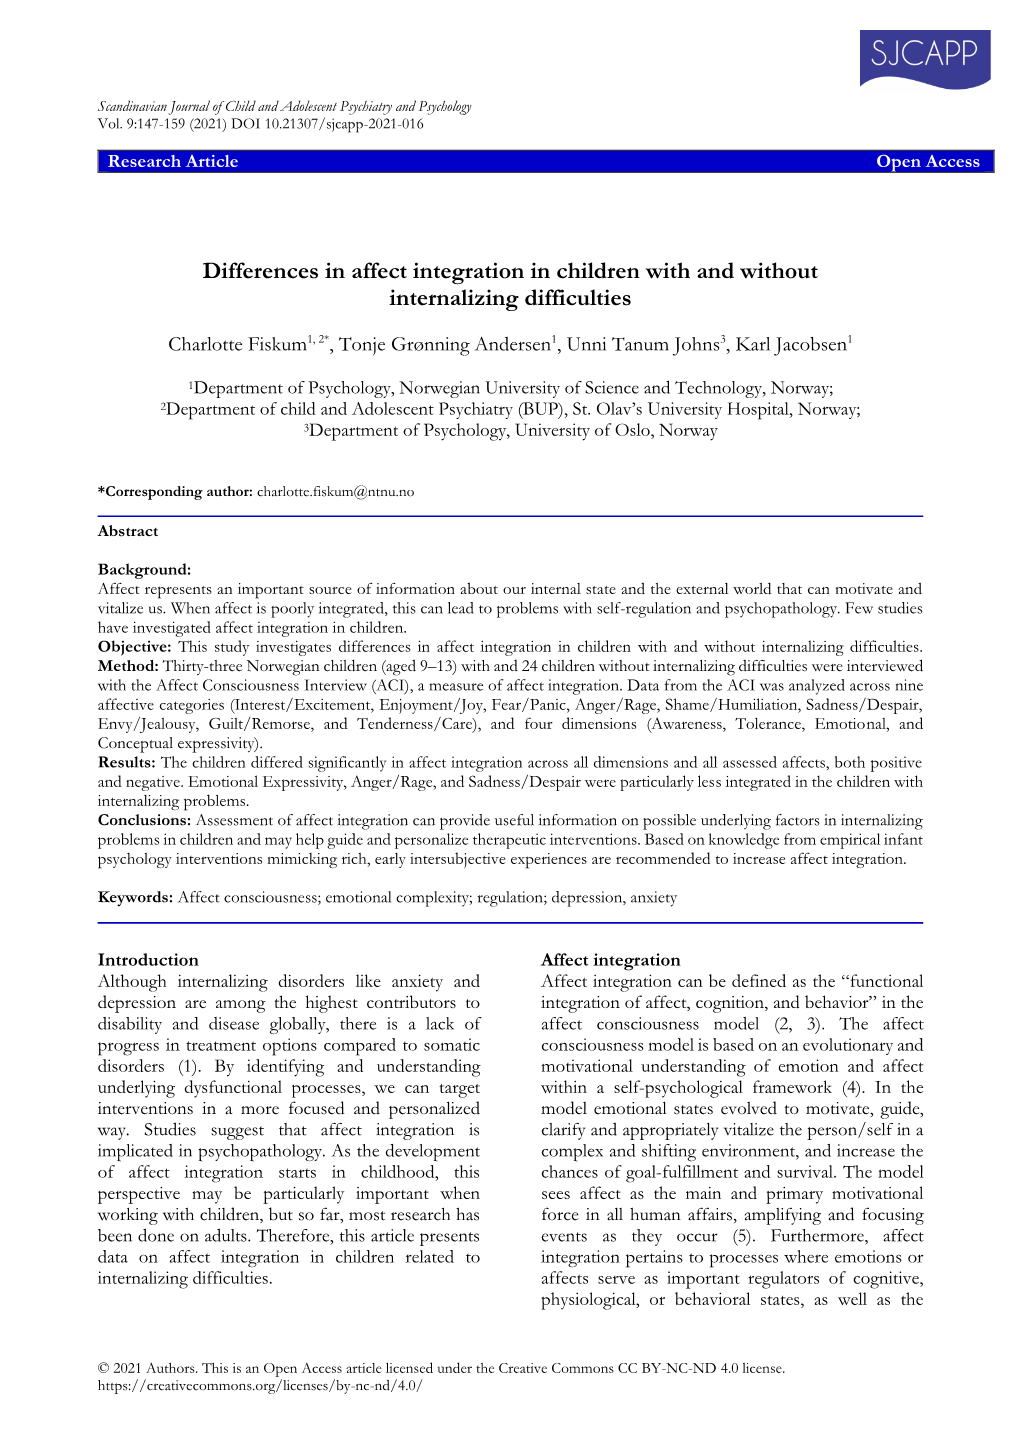 Differences in Affect Integration in Children with and Without Internalizing Difficulties